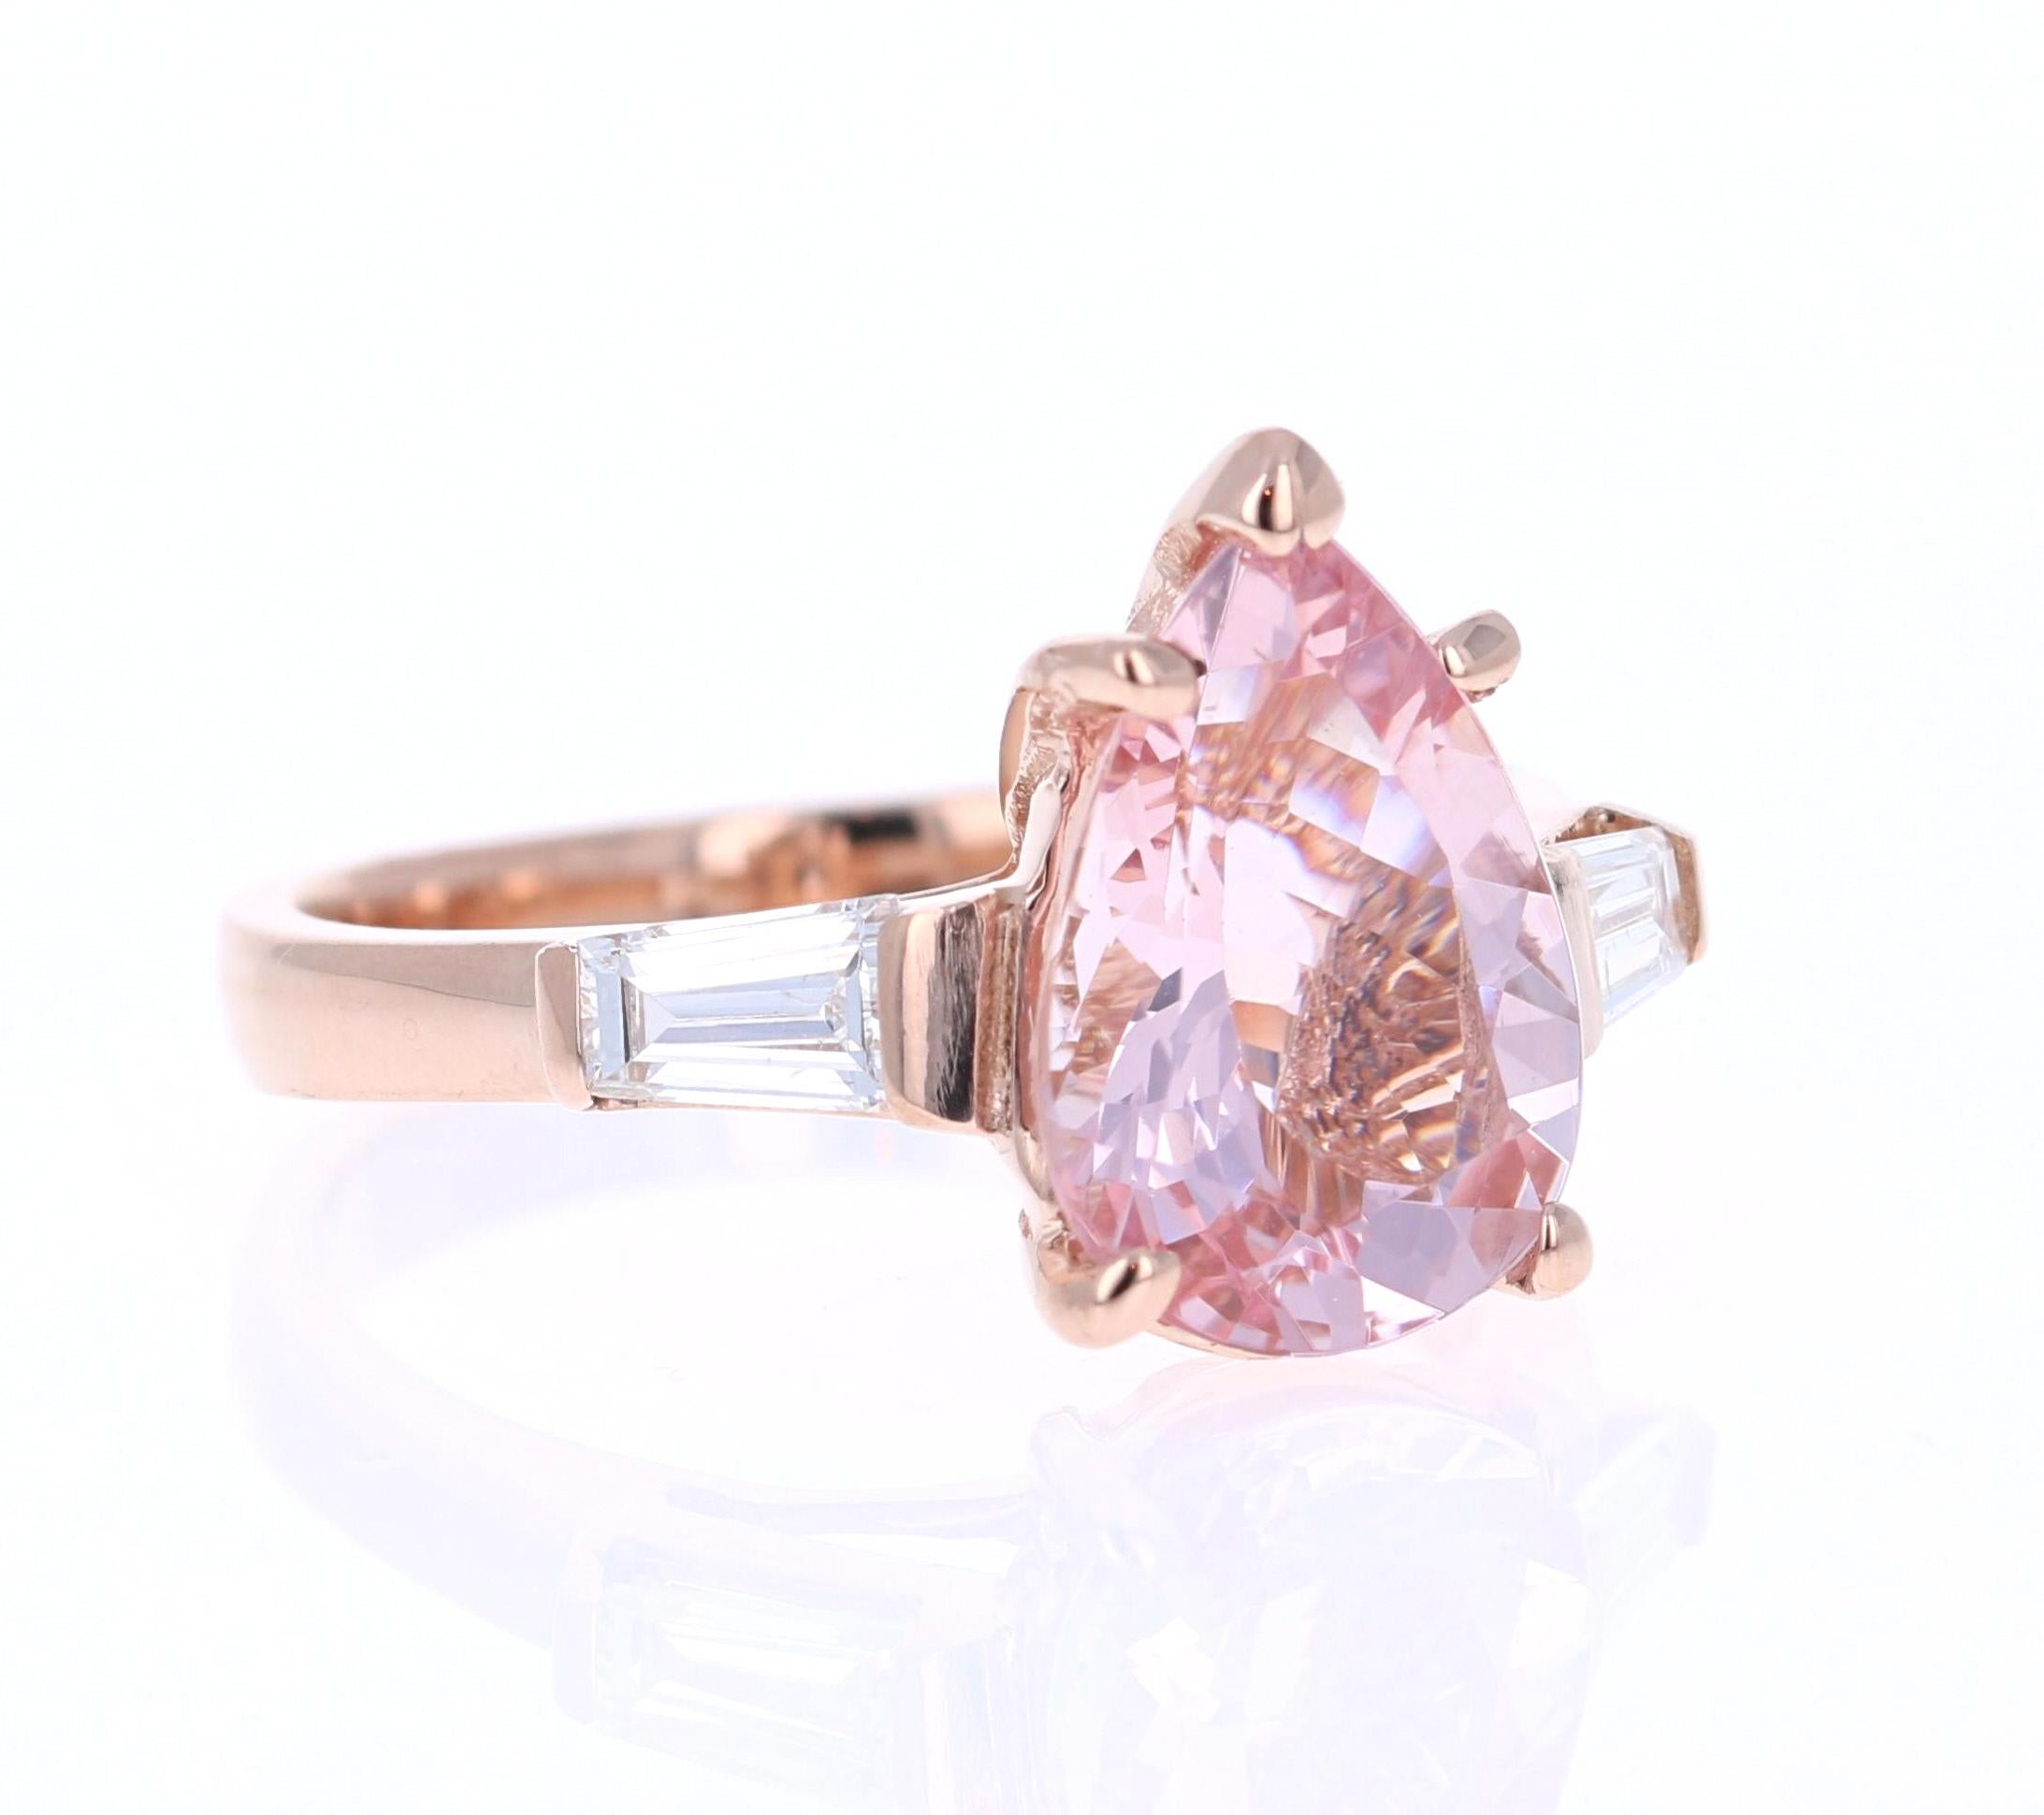 3.51 Carat Pear Cut Pink Morganite Diamond Rose Gold Engagement Ring

This gorgeous and classy Morganite and Diamond Ring has a 2.94 Carat Pear Cut Pink Morganite and has 2 Baguette Cut Diamonds that weigh 0.57 carats (Clarity: SI, Color: F). The